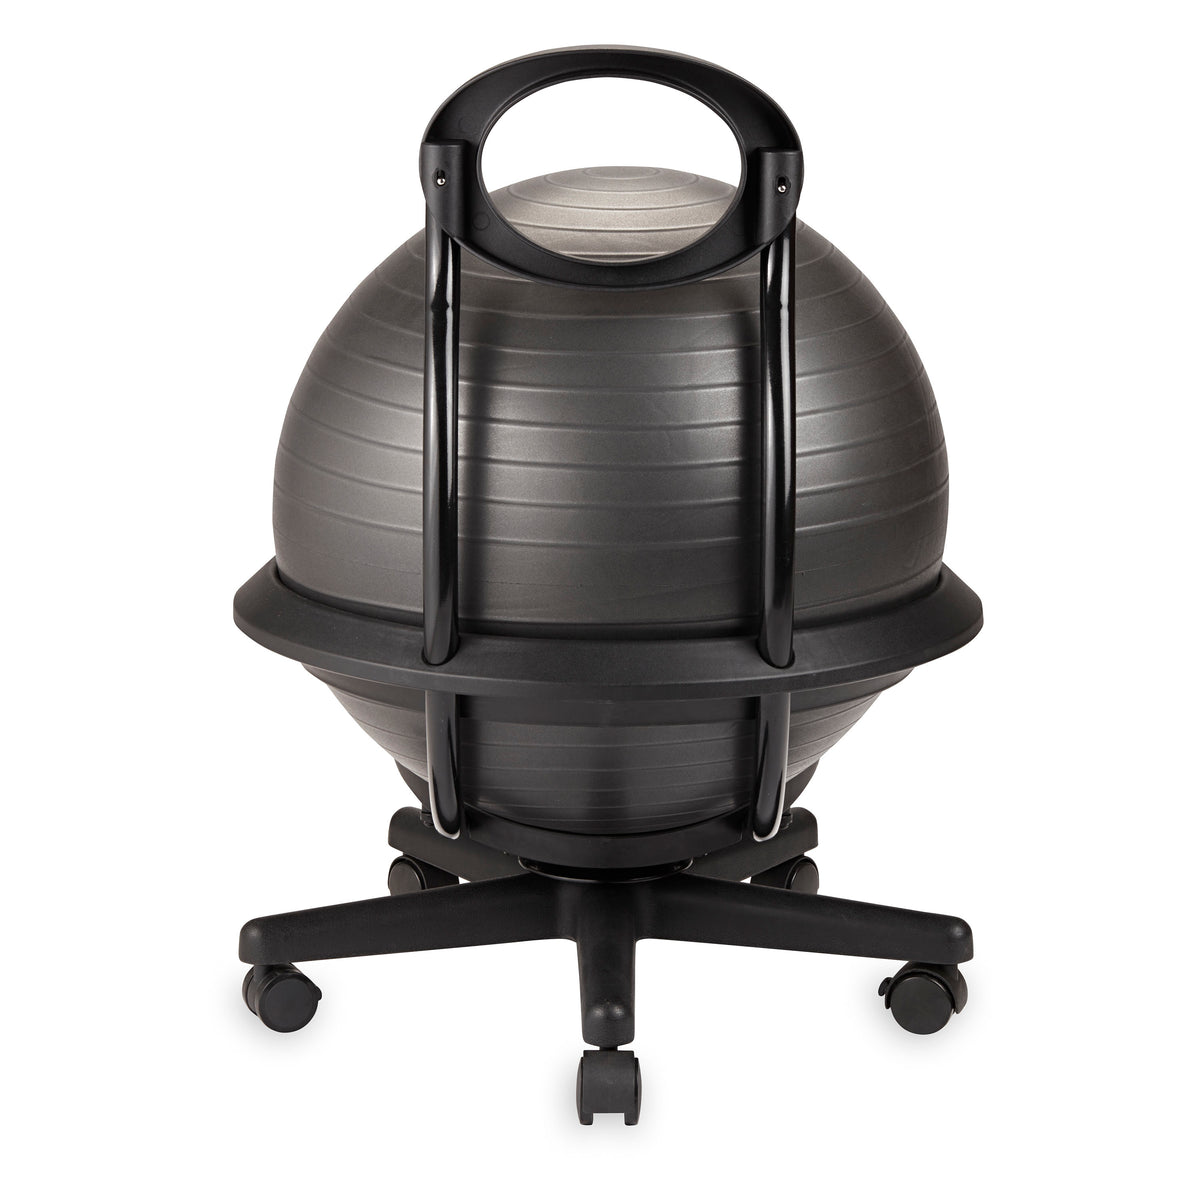 Gaiam Ultimate Balance Ball Chair With Swivel back